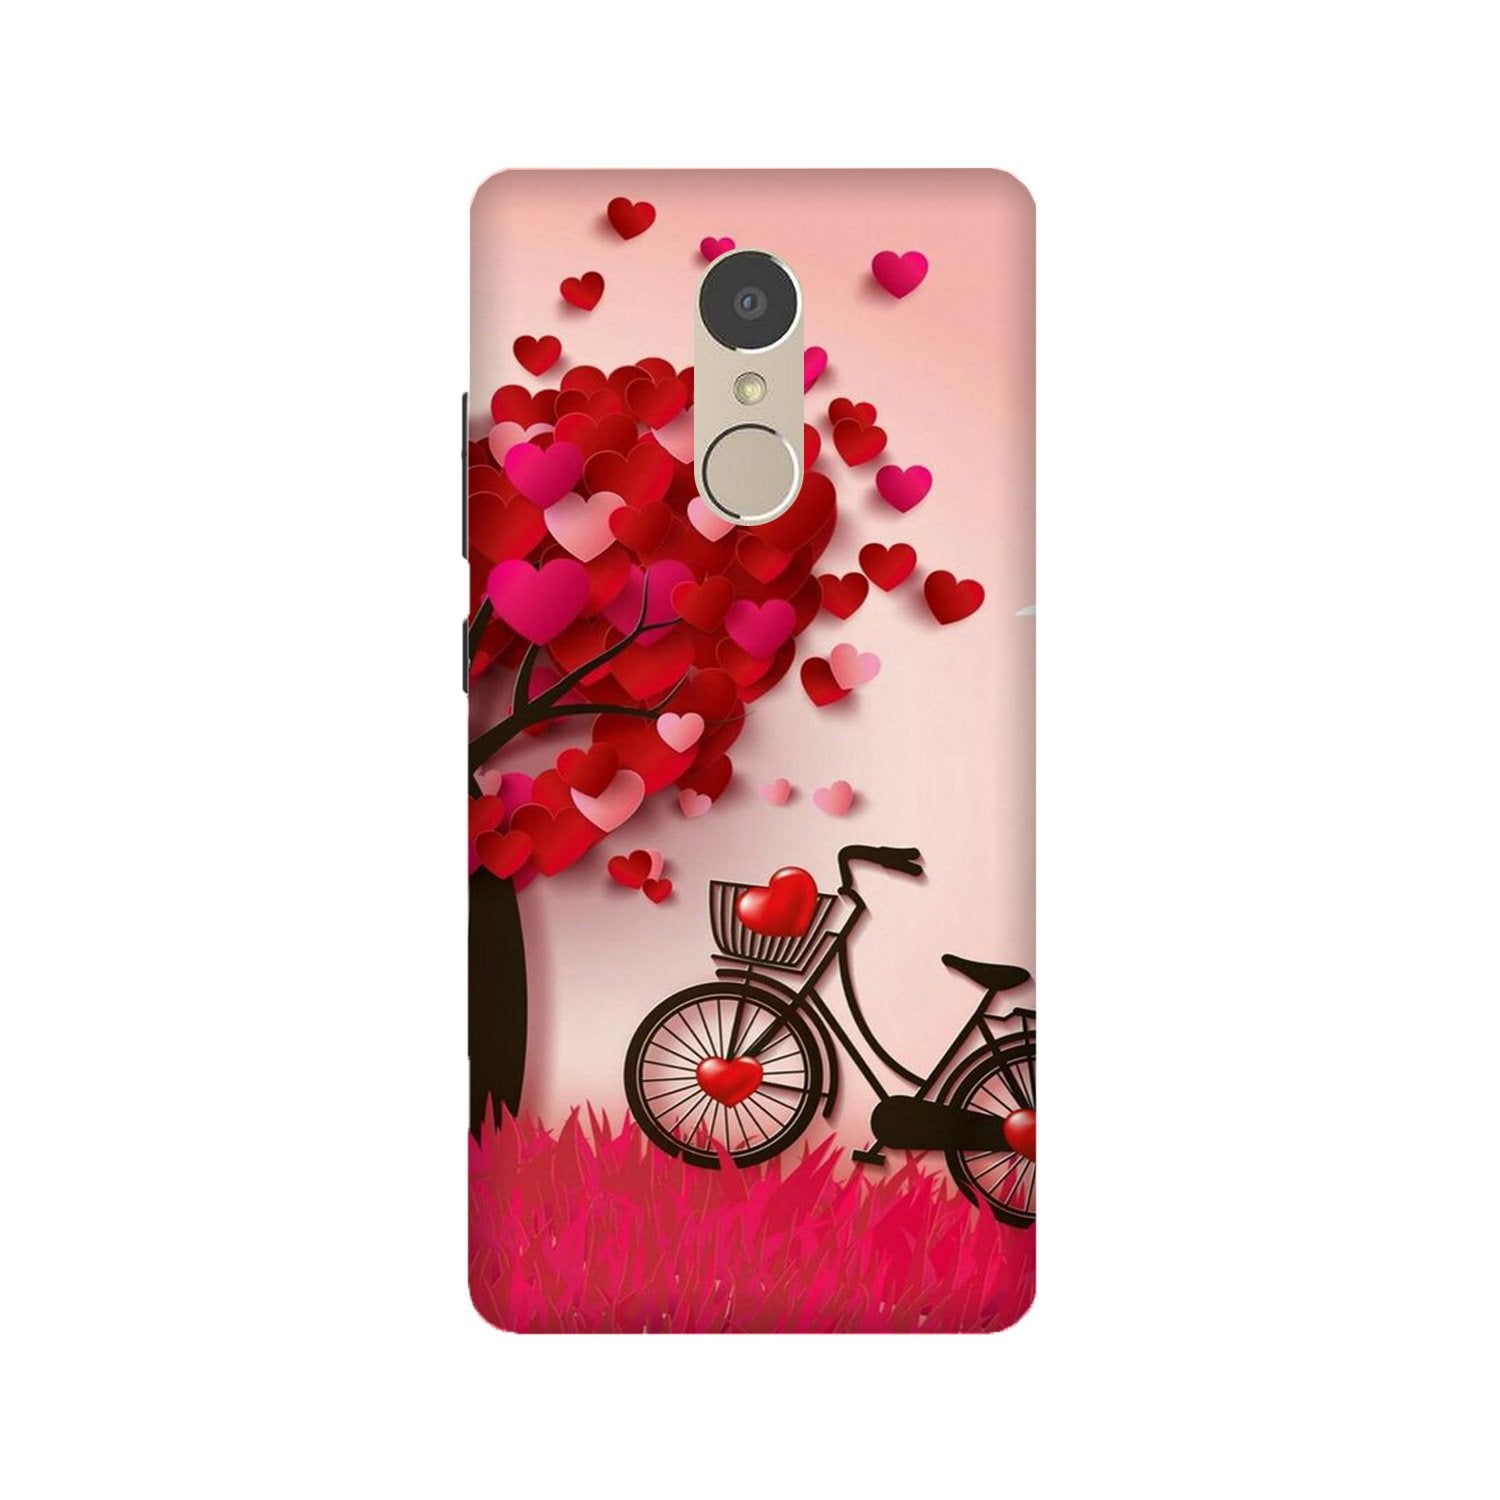 Red Heart Cycle Case for Lenovo K6 Note (Design No. 222)